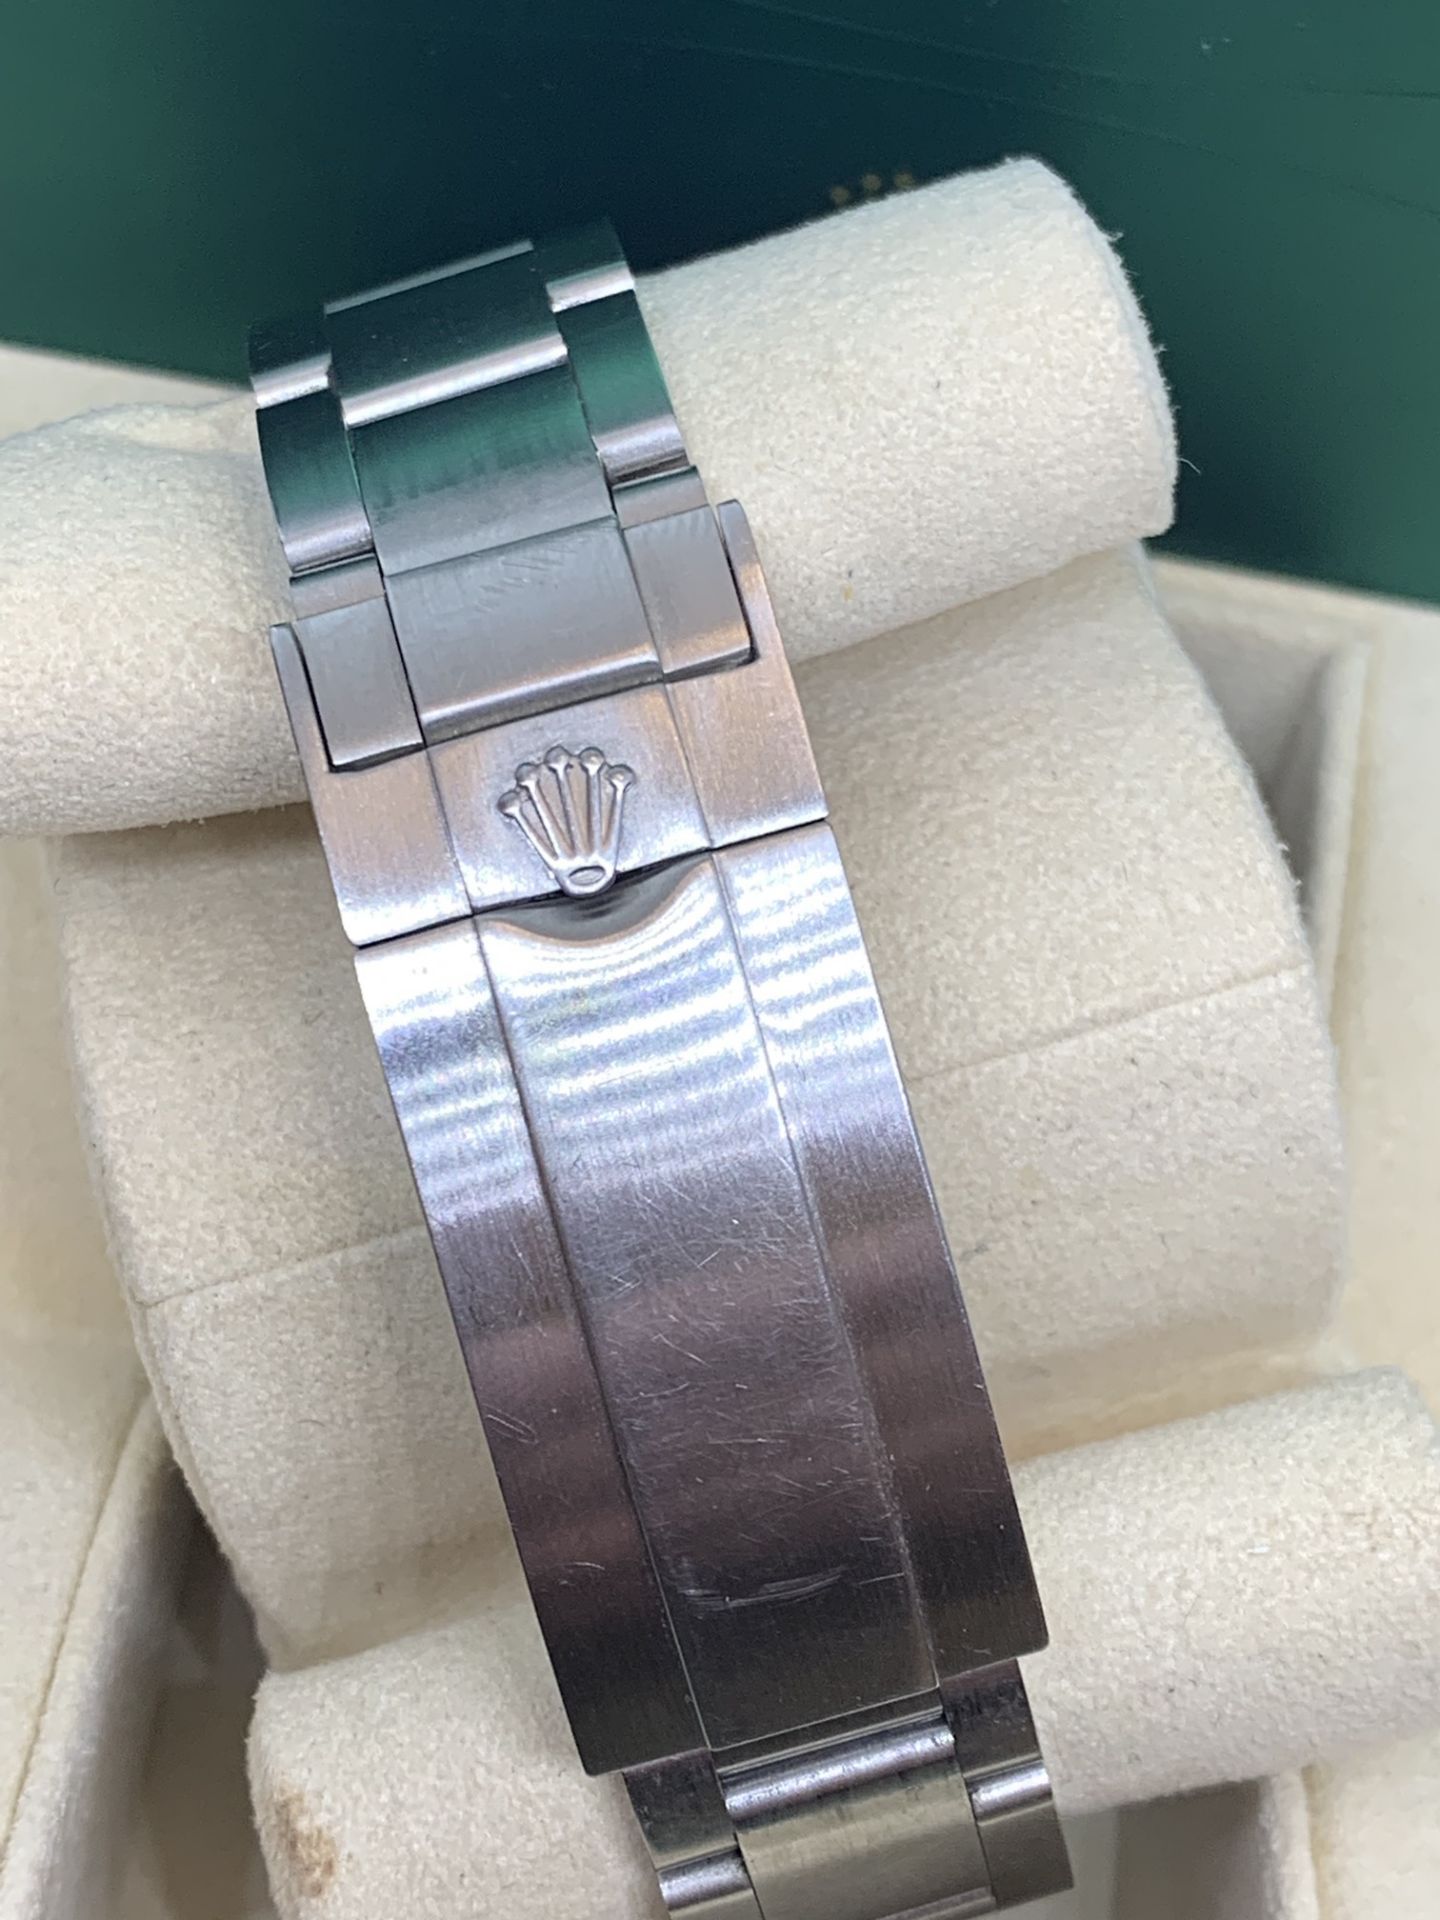 ROLEX SUBMARINER 3135 MOVEMENT WITH S/S METAL WATCH CASE - Image 12 of 13